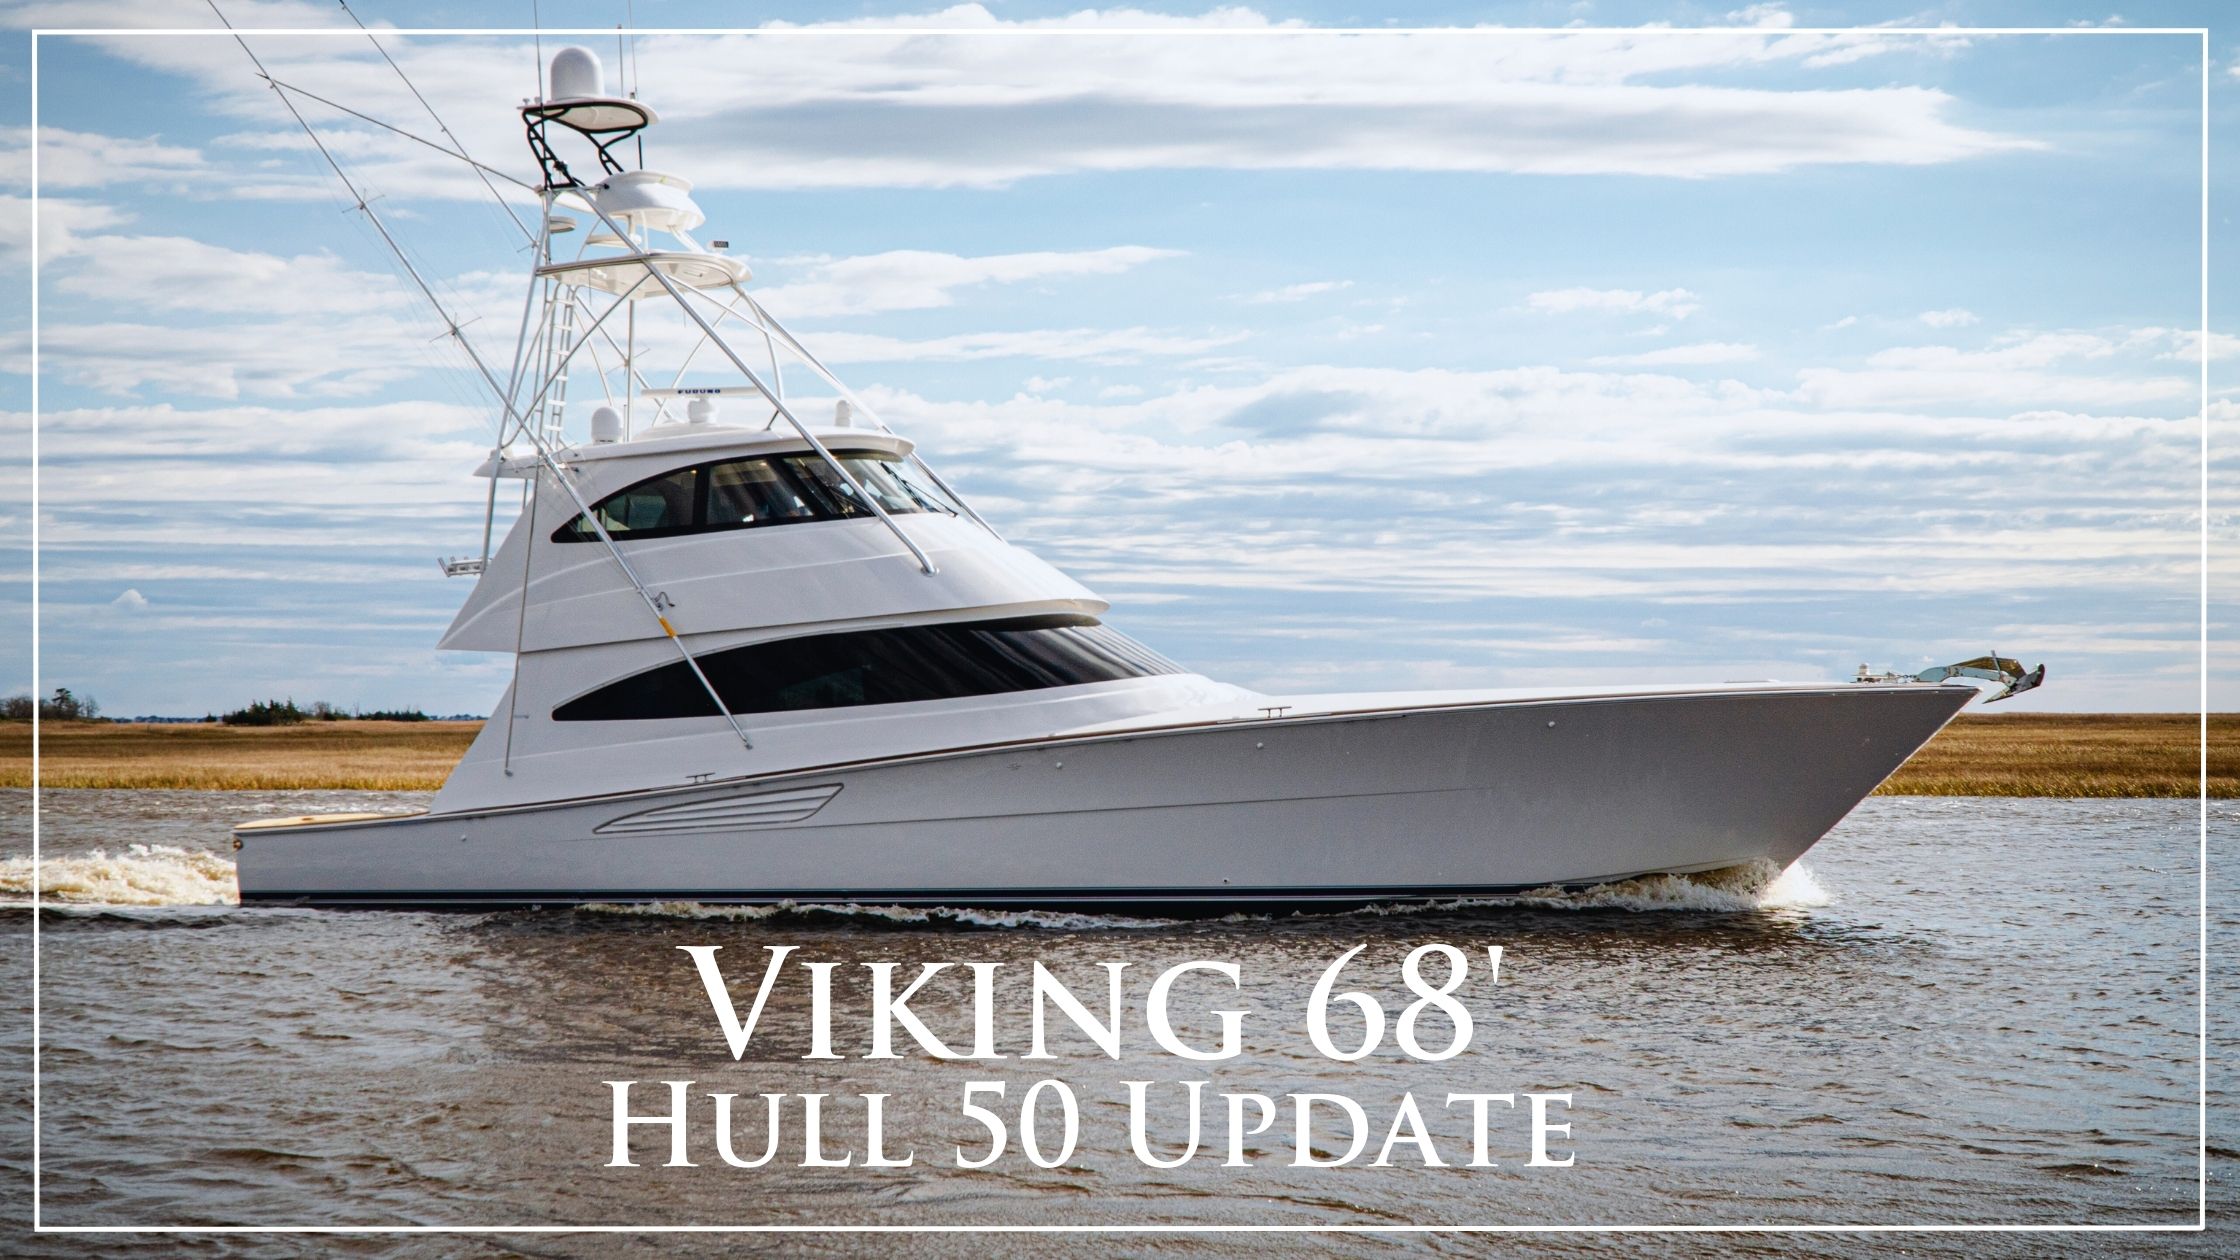 Hull Number 50 Of The Viking 68